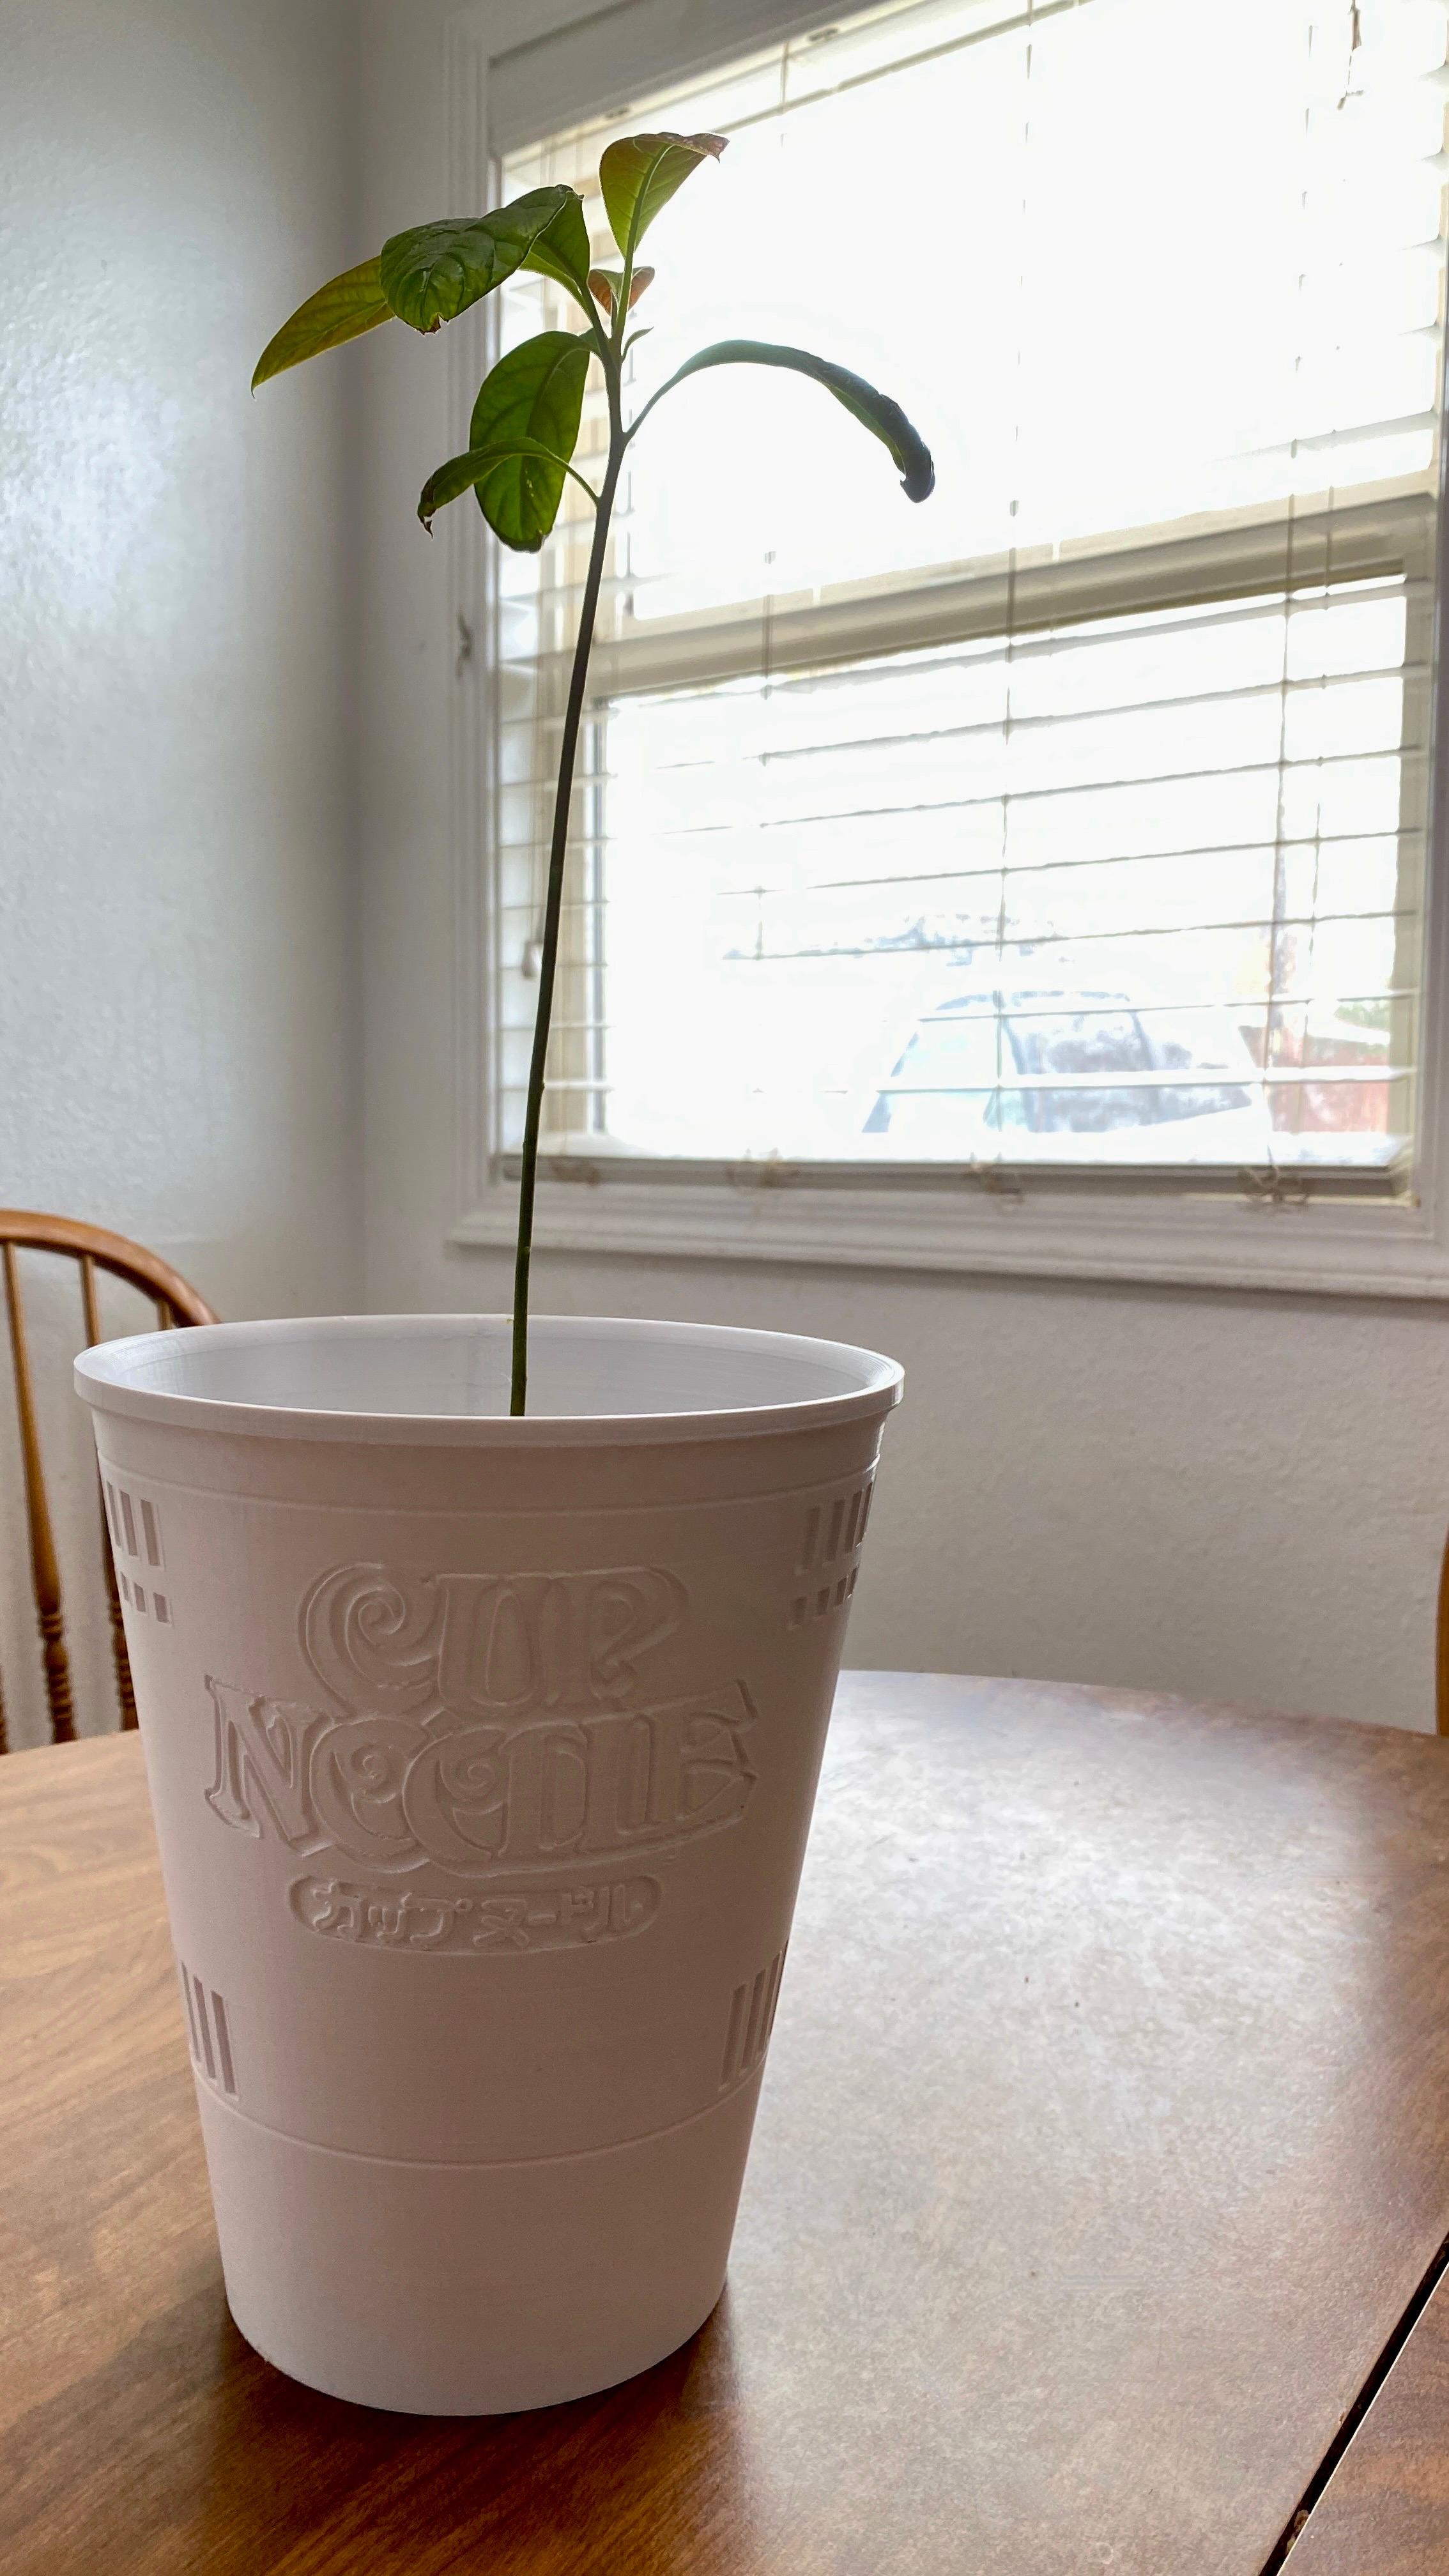 cup noodle pot - Printed at 200% at a very modified .28mm layer hight. Ender 3 V2 with Matterhacker Build PLA. Turned out better than I could have asked for! (200% is the size of a rubbish bin or large flower-pot) - 3d model